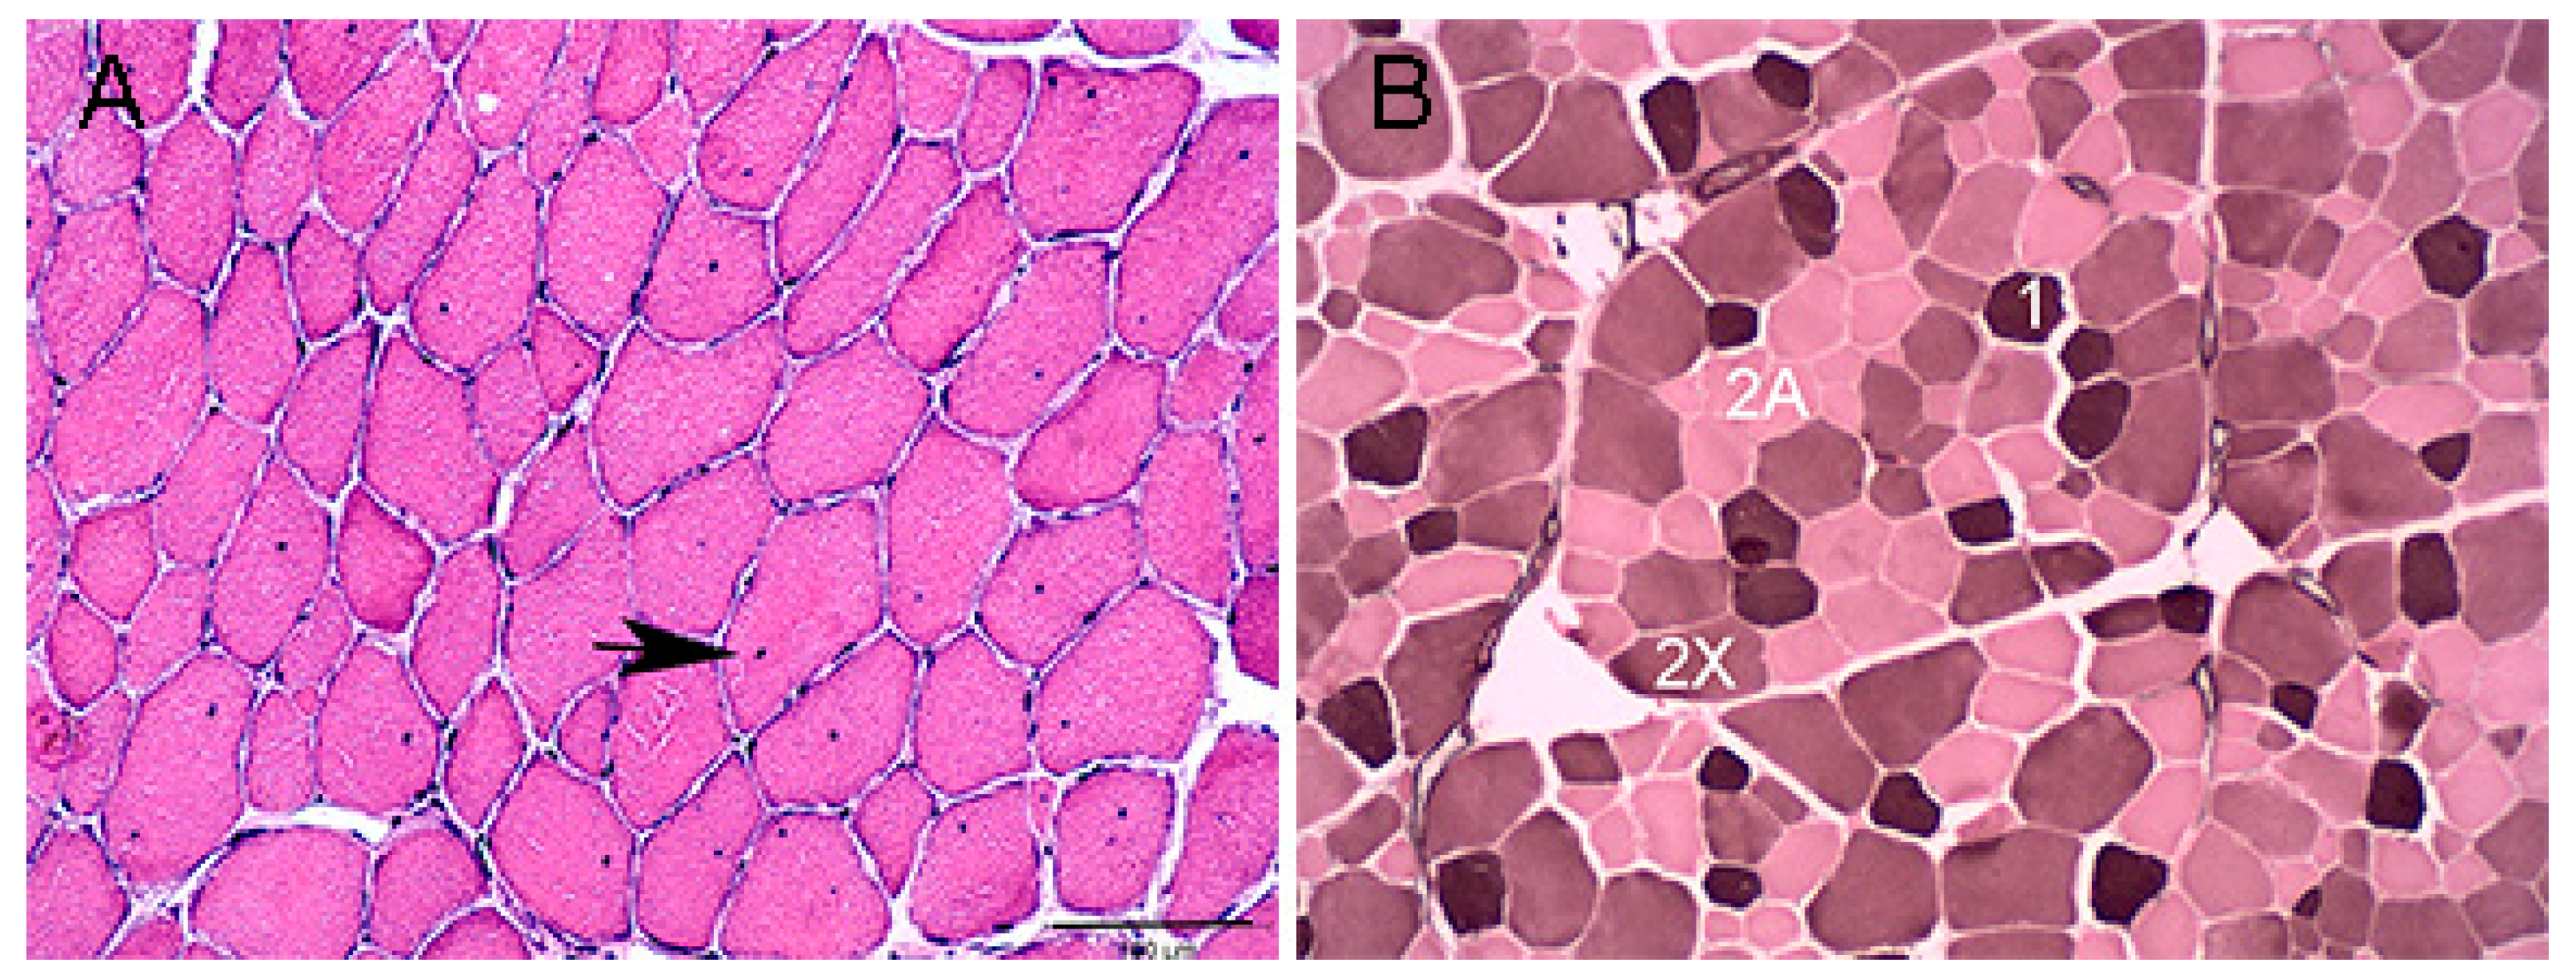 Genes | Free Full-Text | Enriched Pathways of Calcium Regulation,  Cellular/Oxidative Stress, Inflammation, and Cell Proliferation  Characterize Gluteal Muscle of Standardbred Horses between Episodes of  Recurrent Exertional Rhabdomyolysis